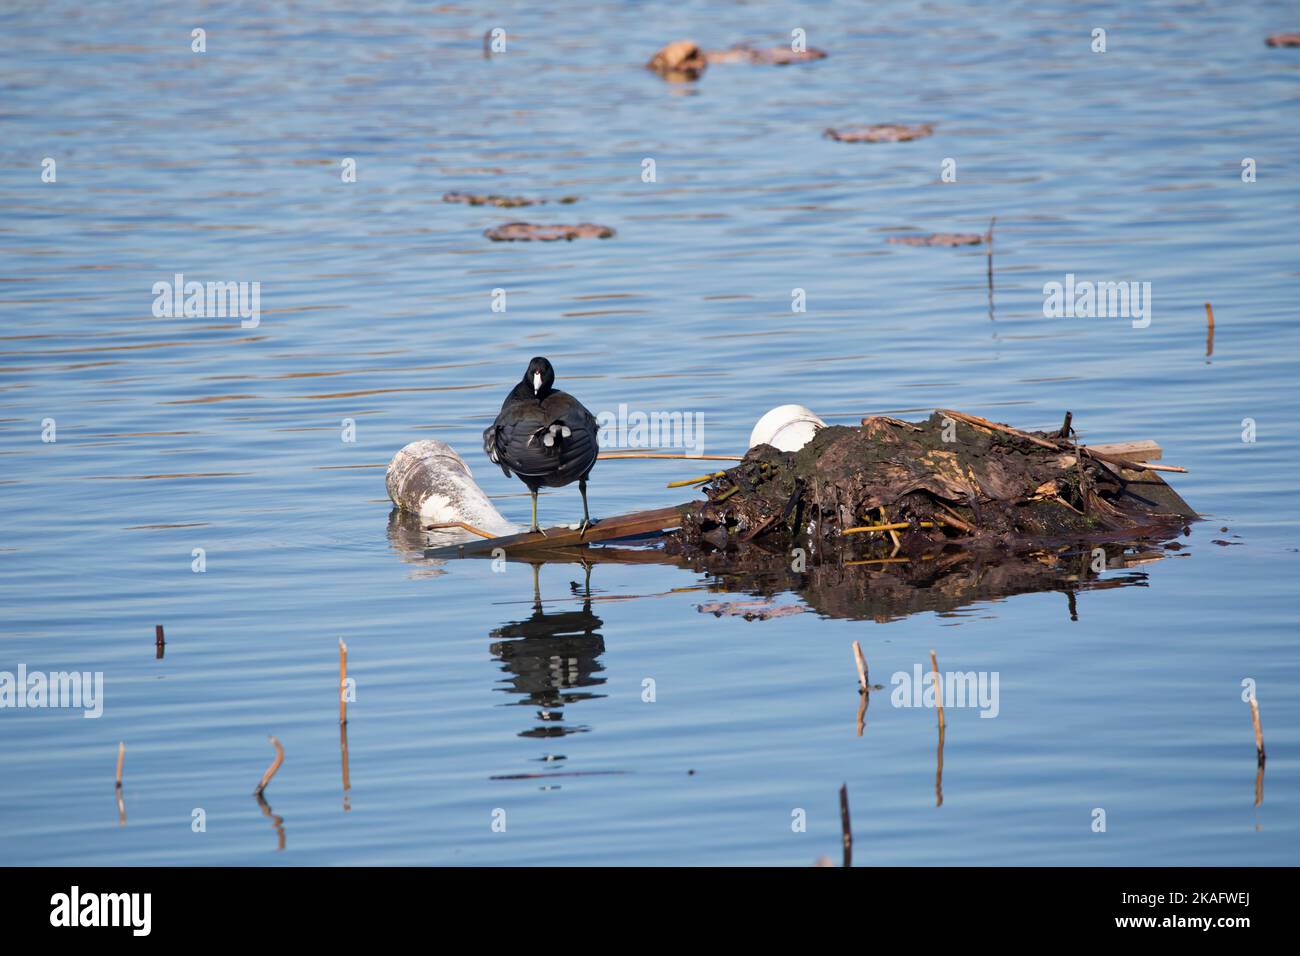 An American coot, fulica americana, stands on a man-made island at a  marsh facing the camera in Iowa on an autumn day. Stock Photo